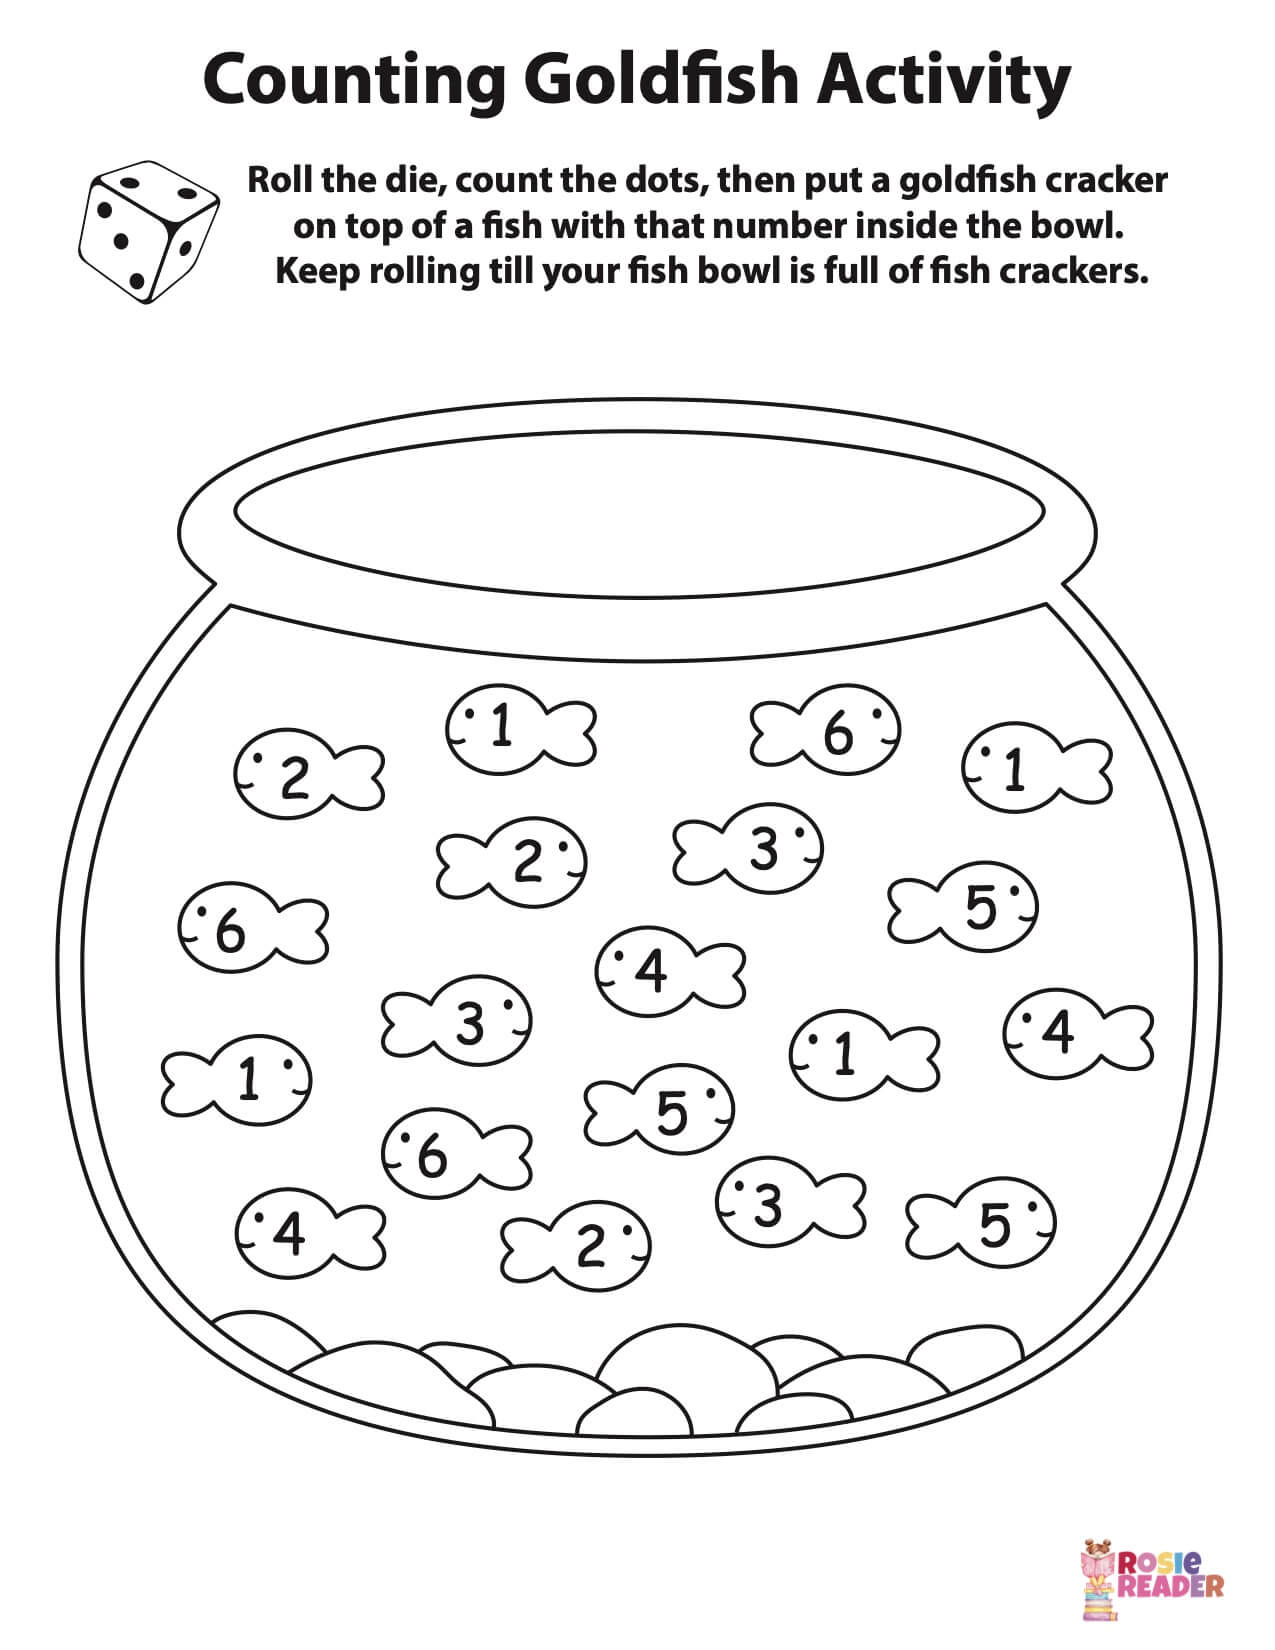 Counting Goldfish Activity Printable Die Reading Adventures For Kids Ages 3 To 5